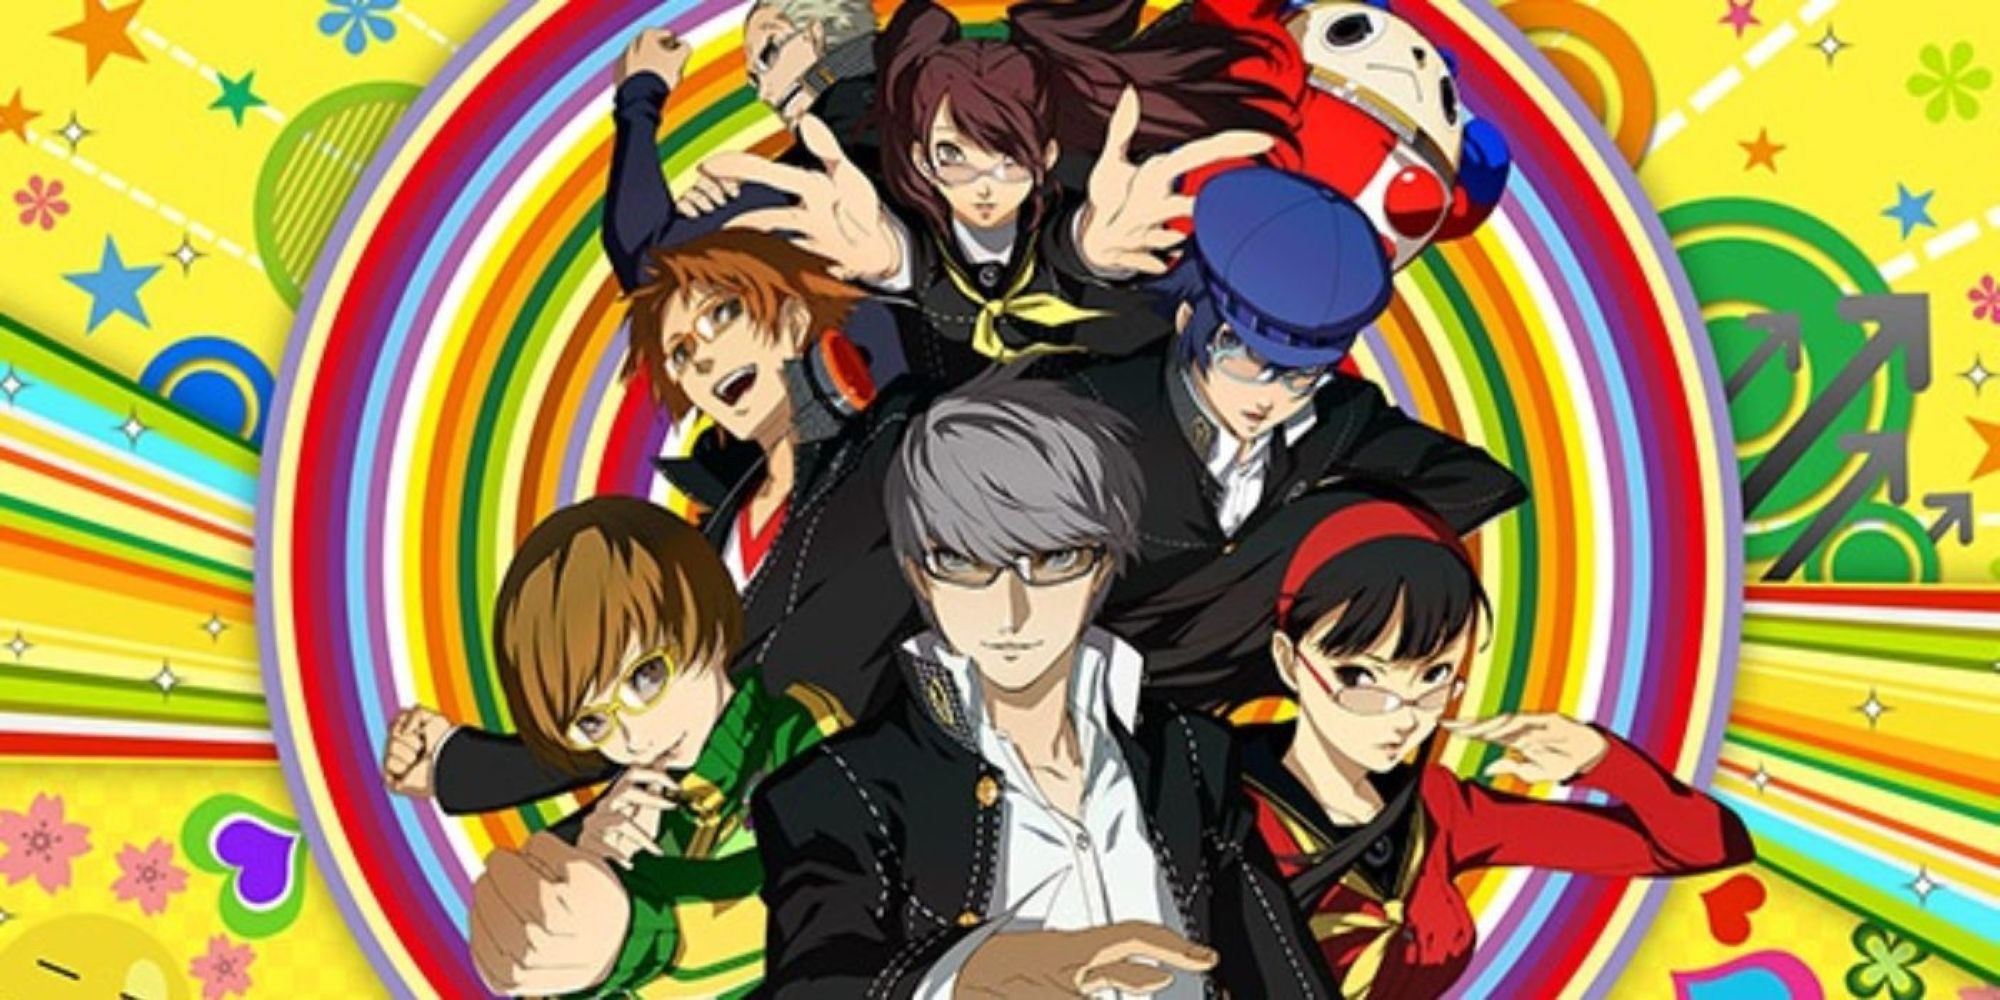 Yu, Chie, Yukiko, Yosuke, Naoto, Rise, Kanji, and Teddy don their special glasses as they delve into the Shadow World in Persona 4 Golden.